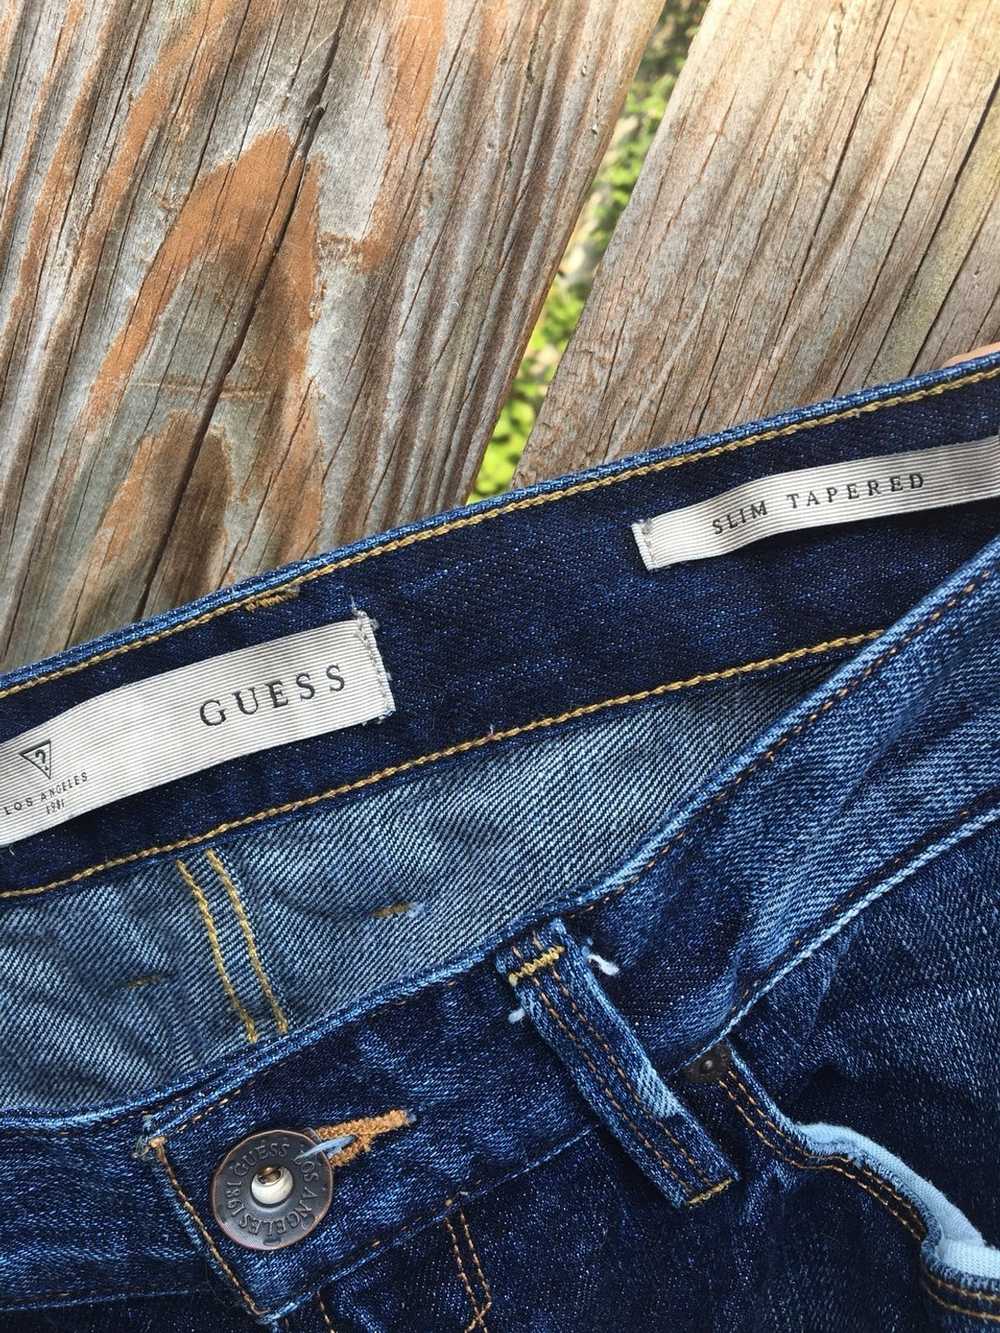 Guess Slim Tapered Raw Denim Jeans - image 6